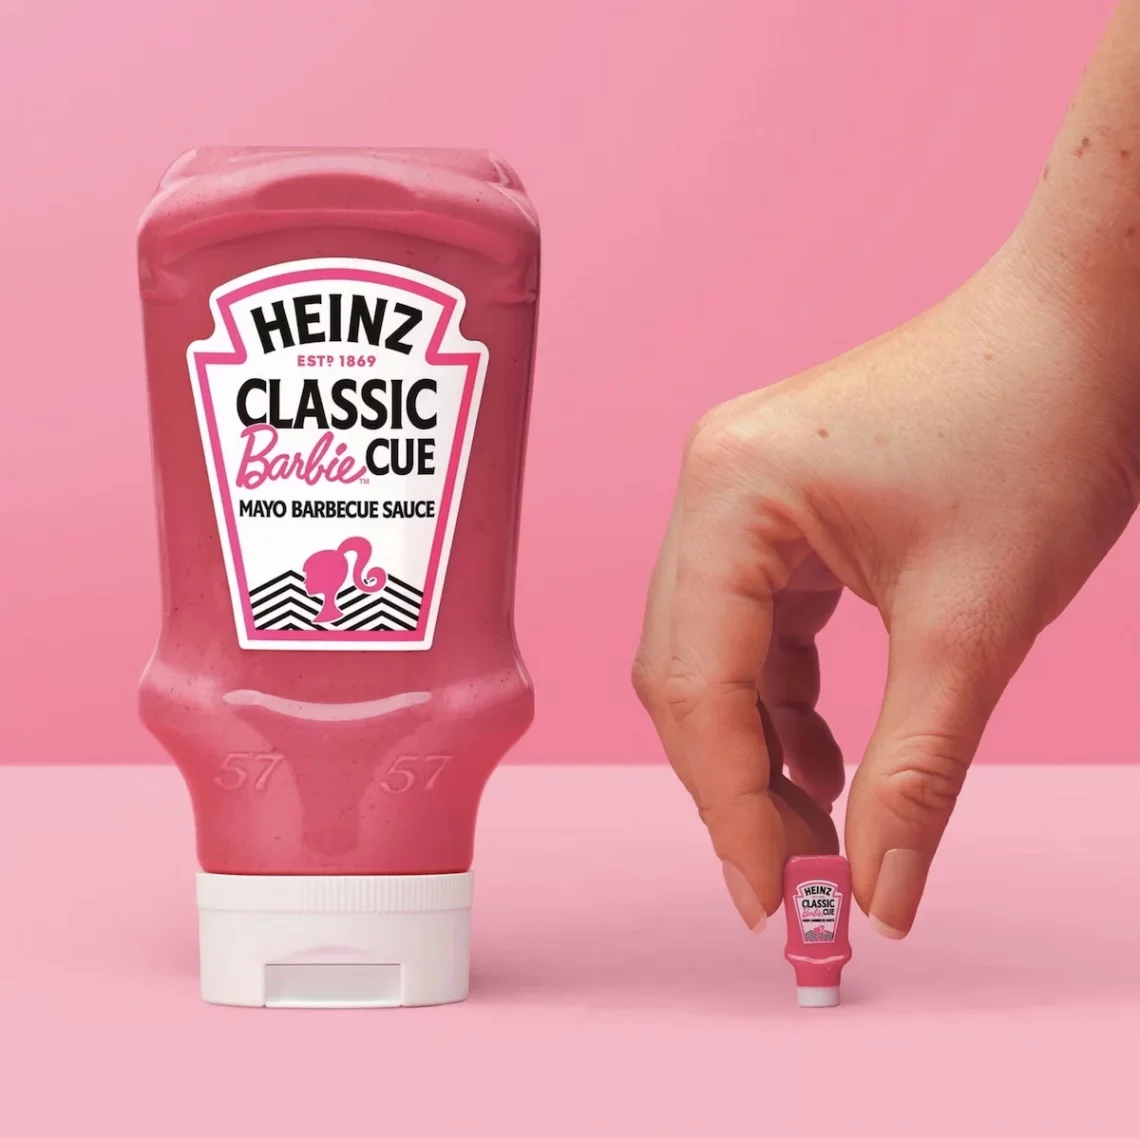 Heinz Barbie. 
Heinz Classic BarbieCue Mayo Barbecue Sauce bottle with pink background, showcasing product design and branding alongside a miniature replica.